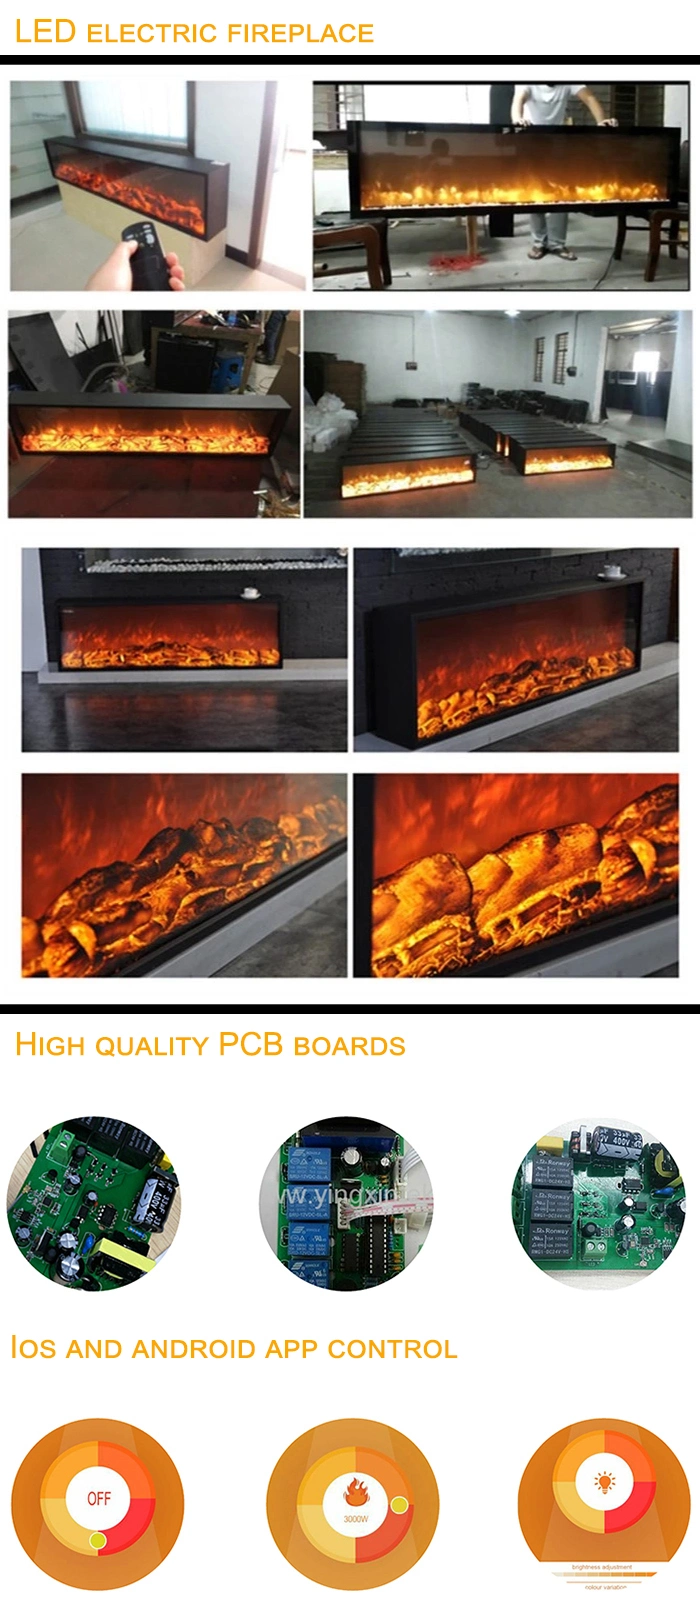 Wall Mounted 3D Decorative Fire Adjustable Remote Control Freestanding Electric Fireplace